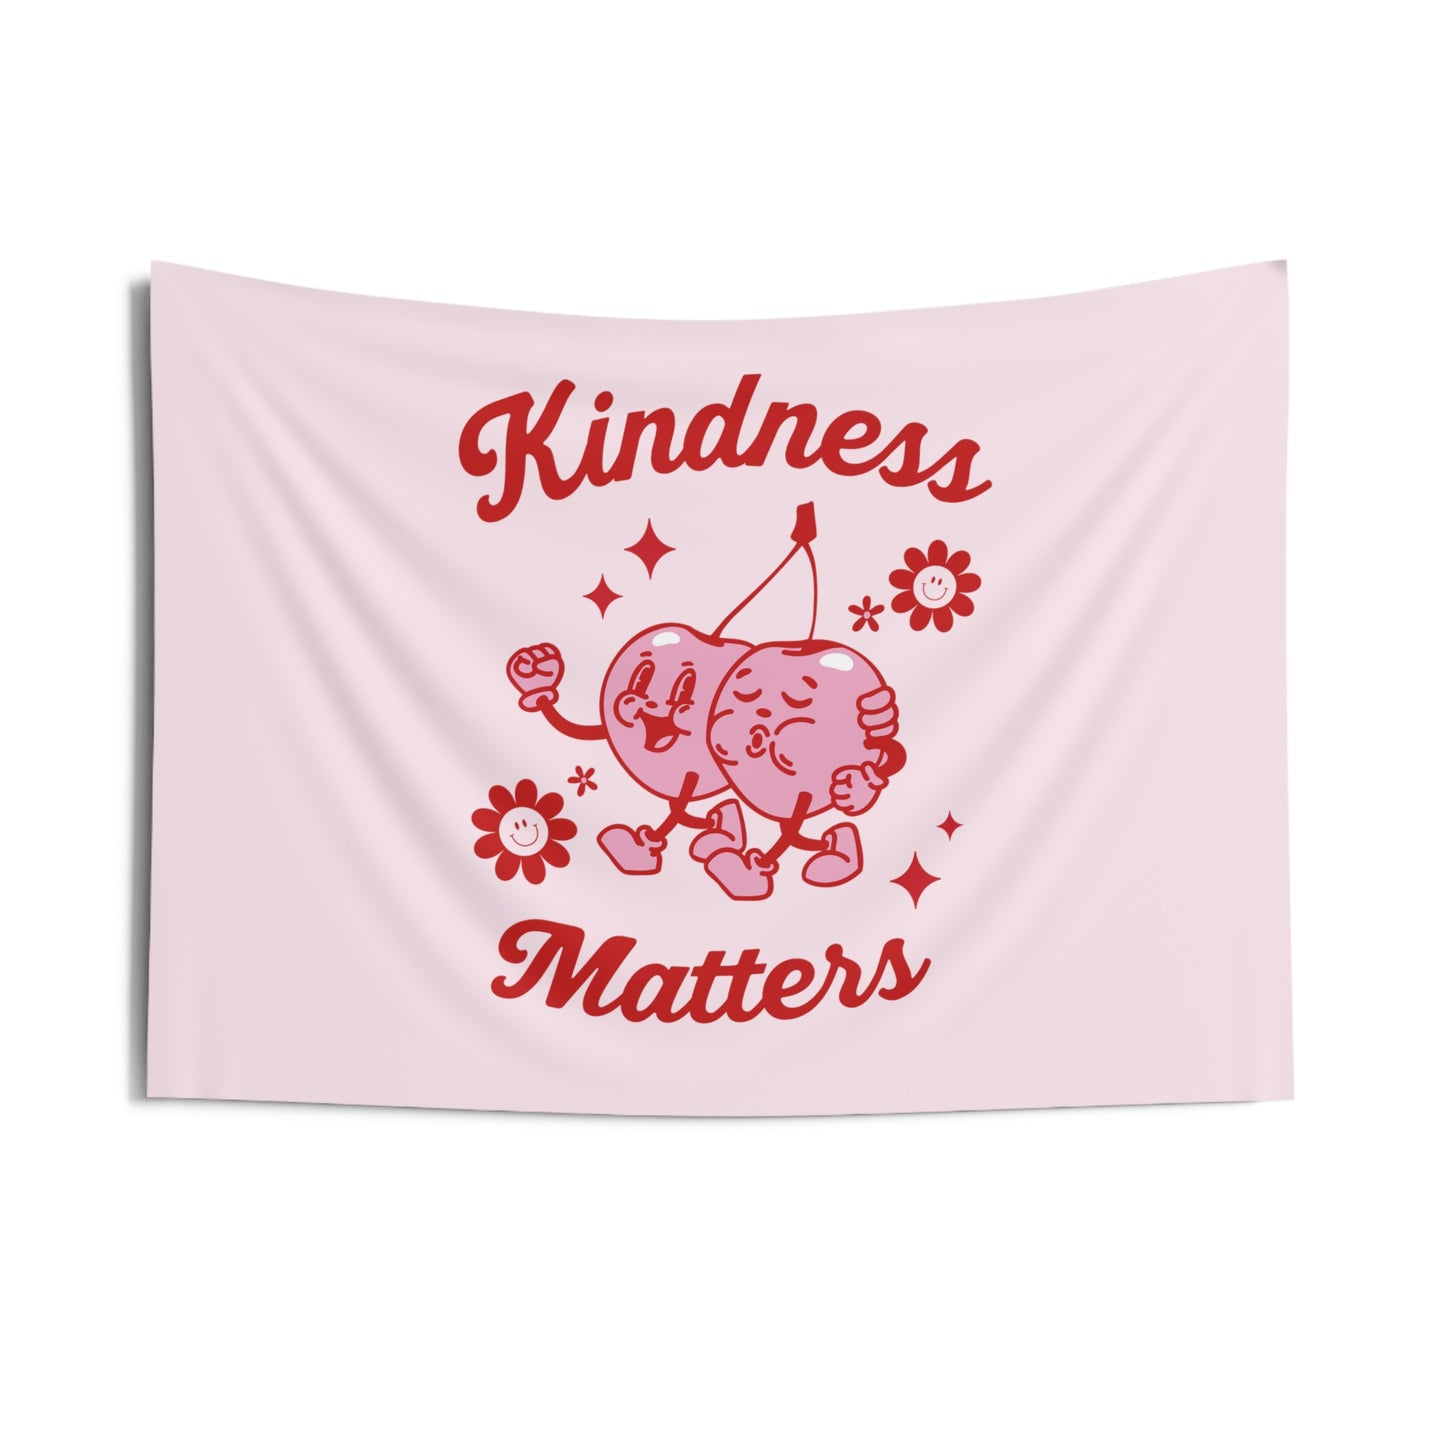 Kindness Matters Wall Tapestry